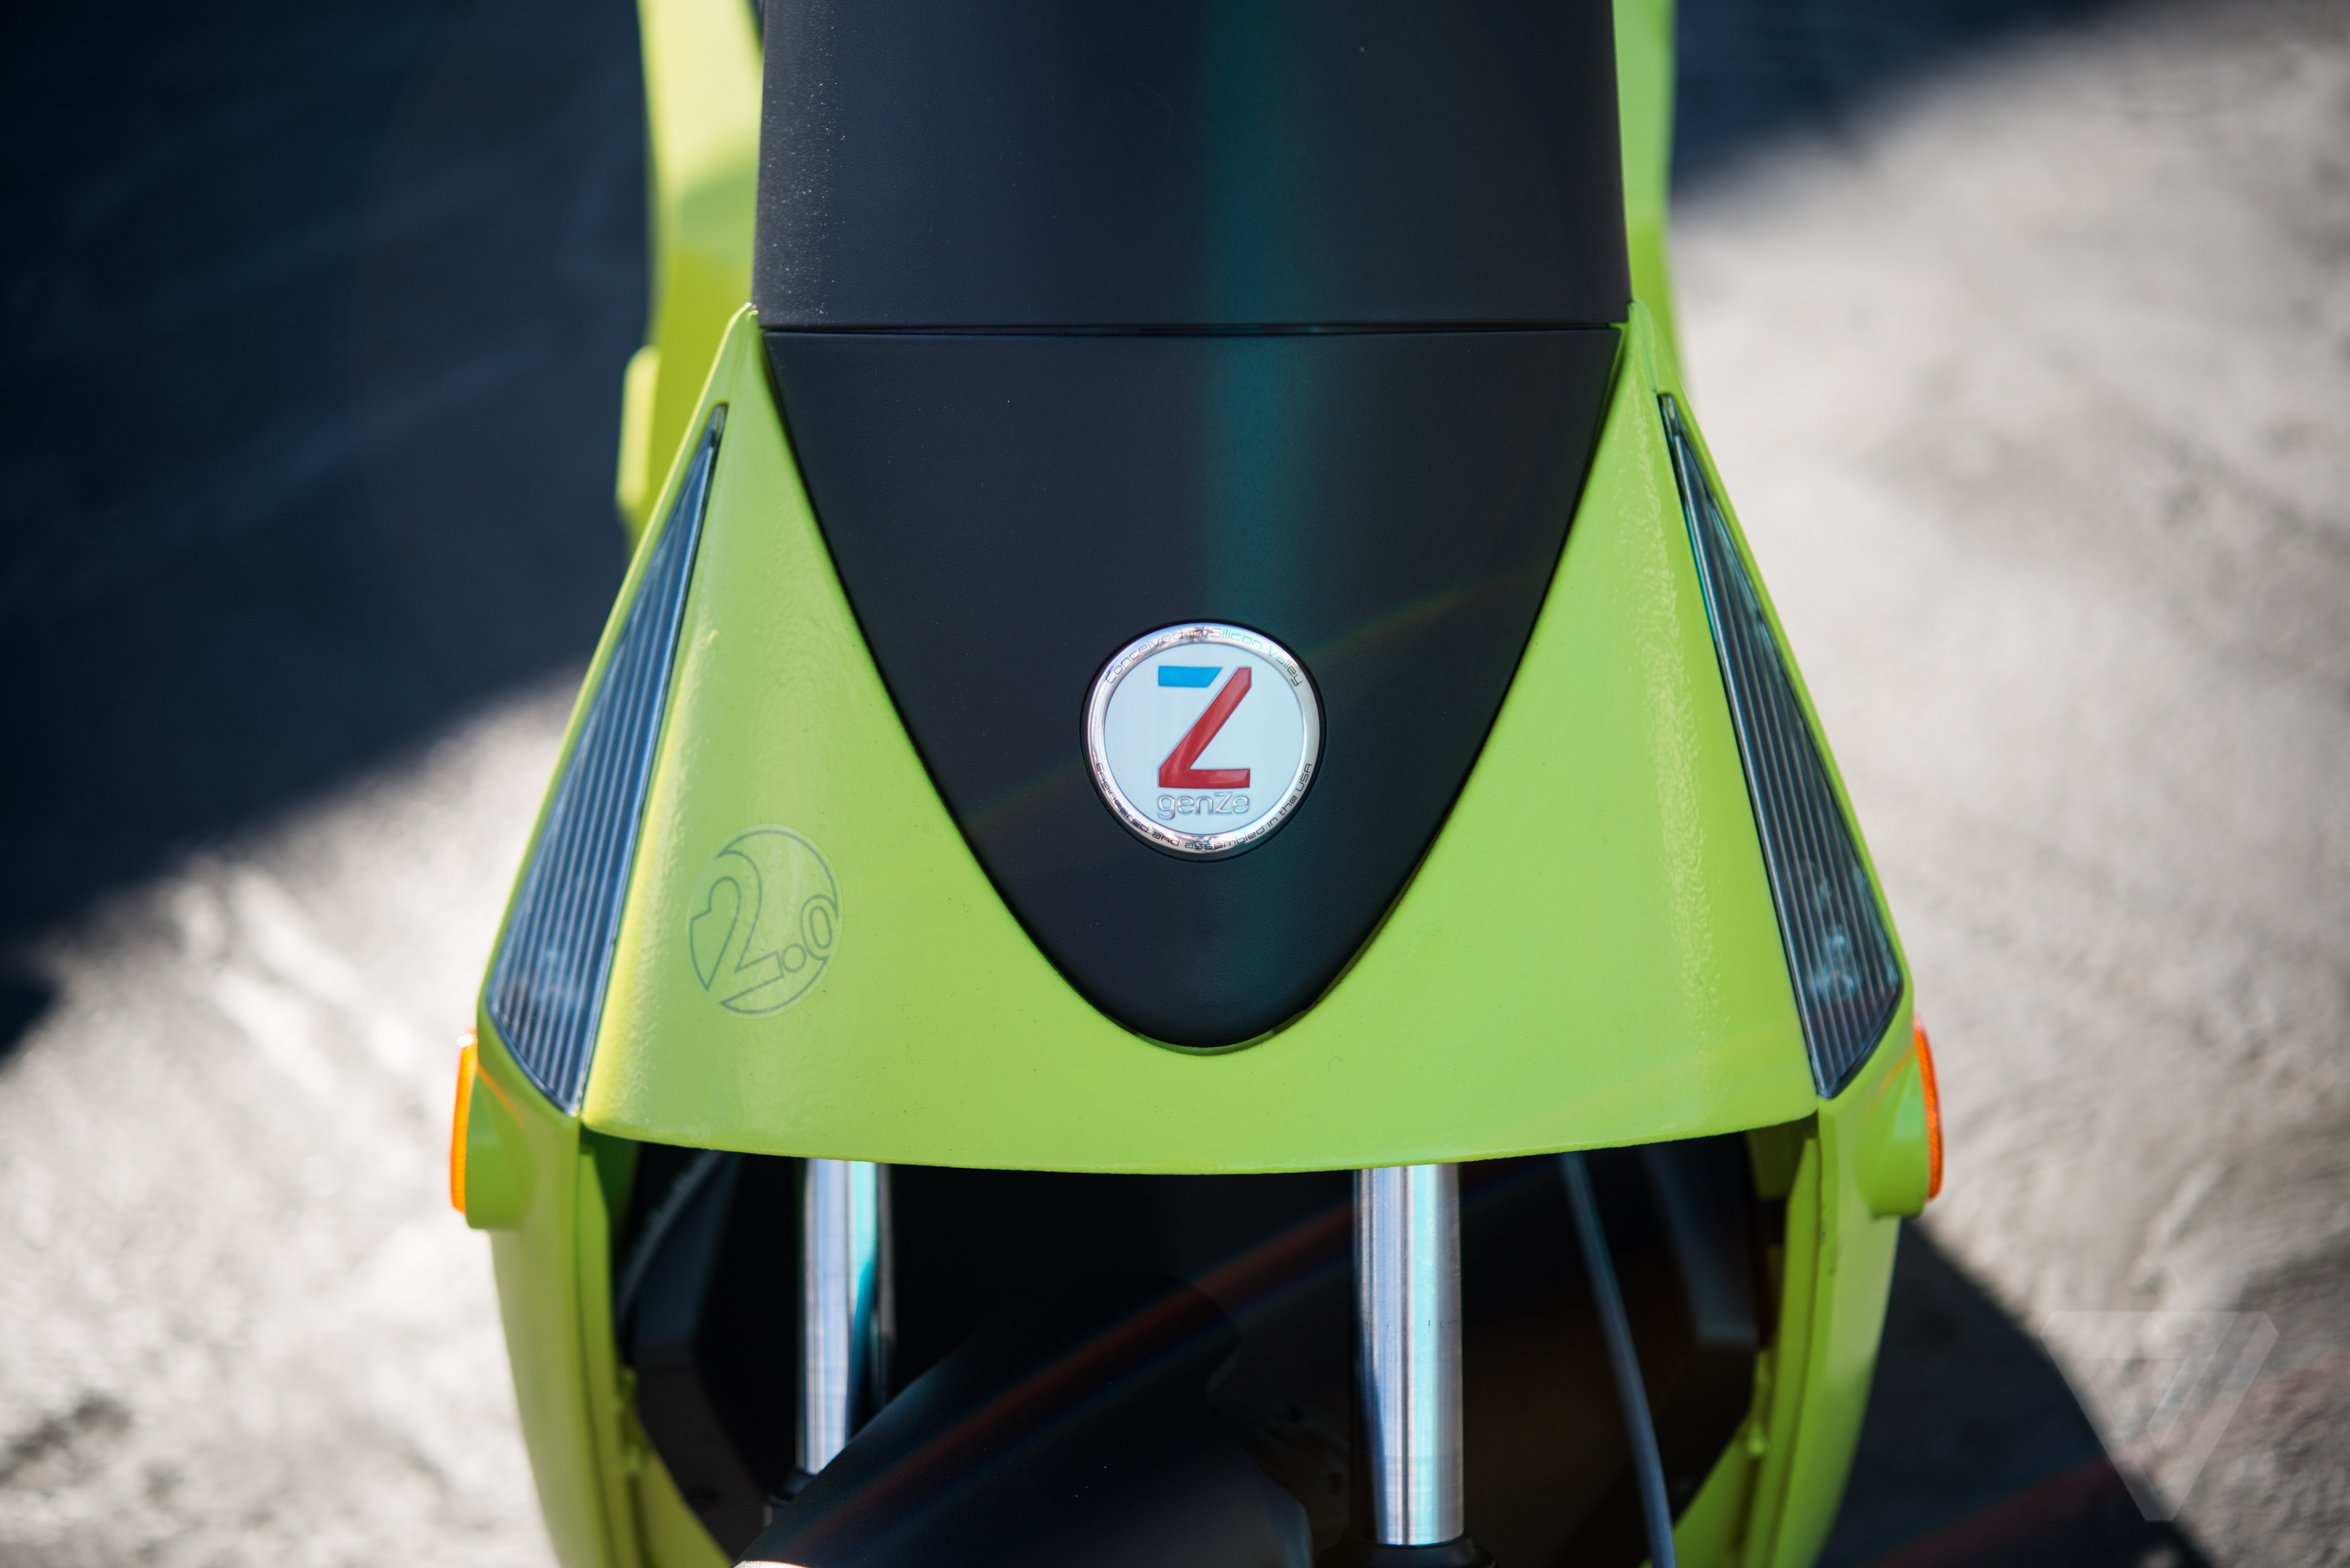 mahindra-genze-2-electric-scooter-2-6.0.jpg